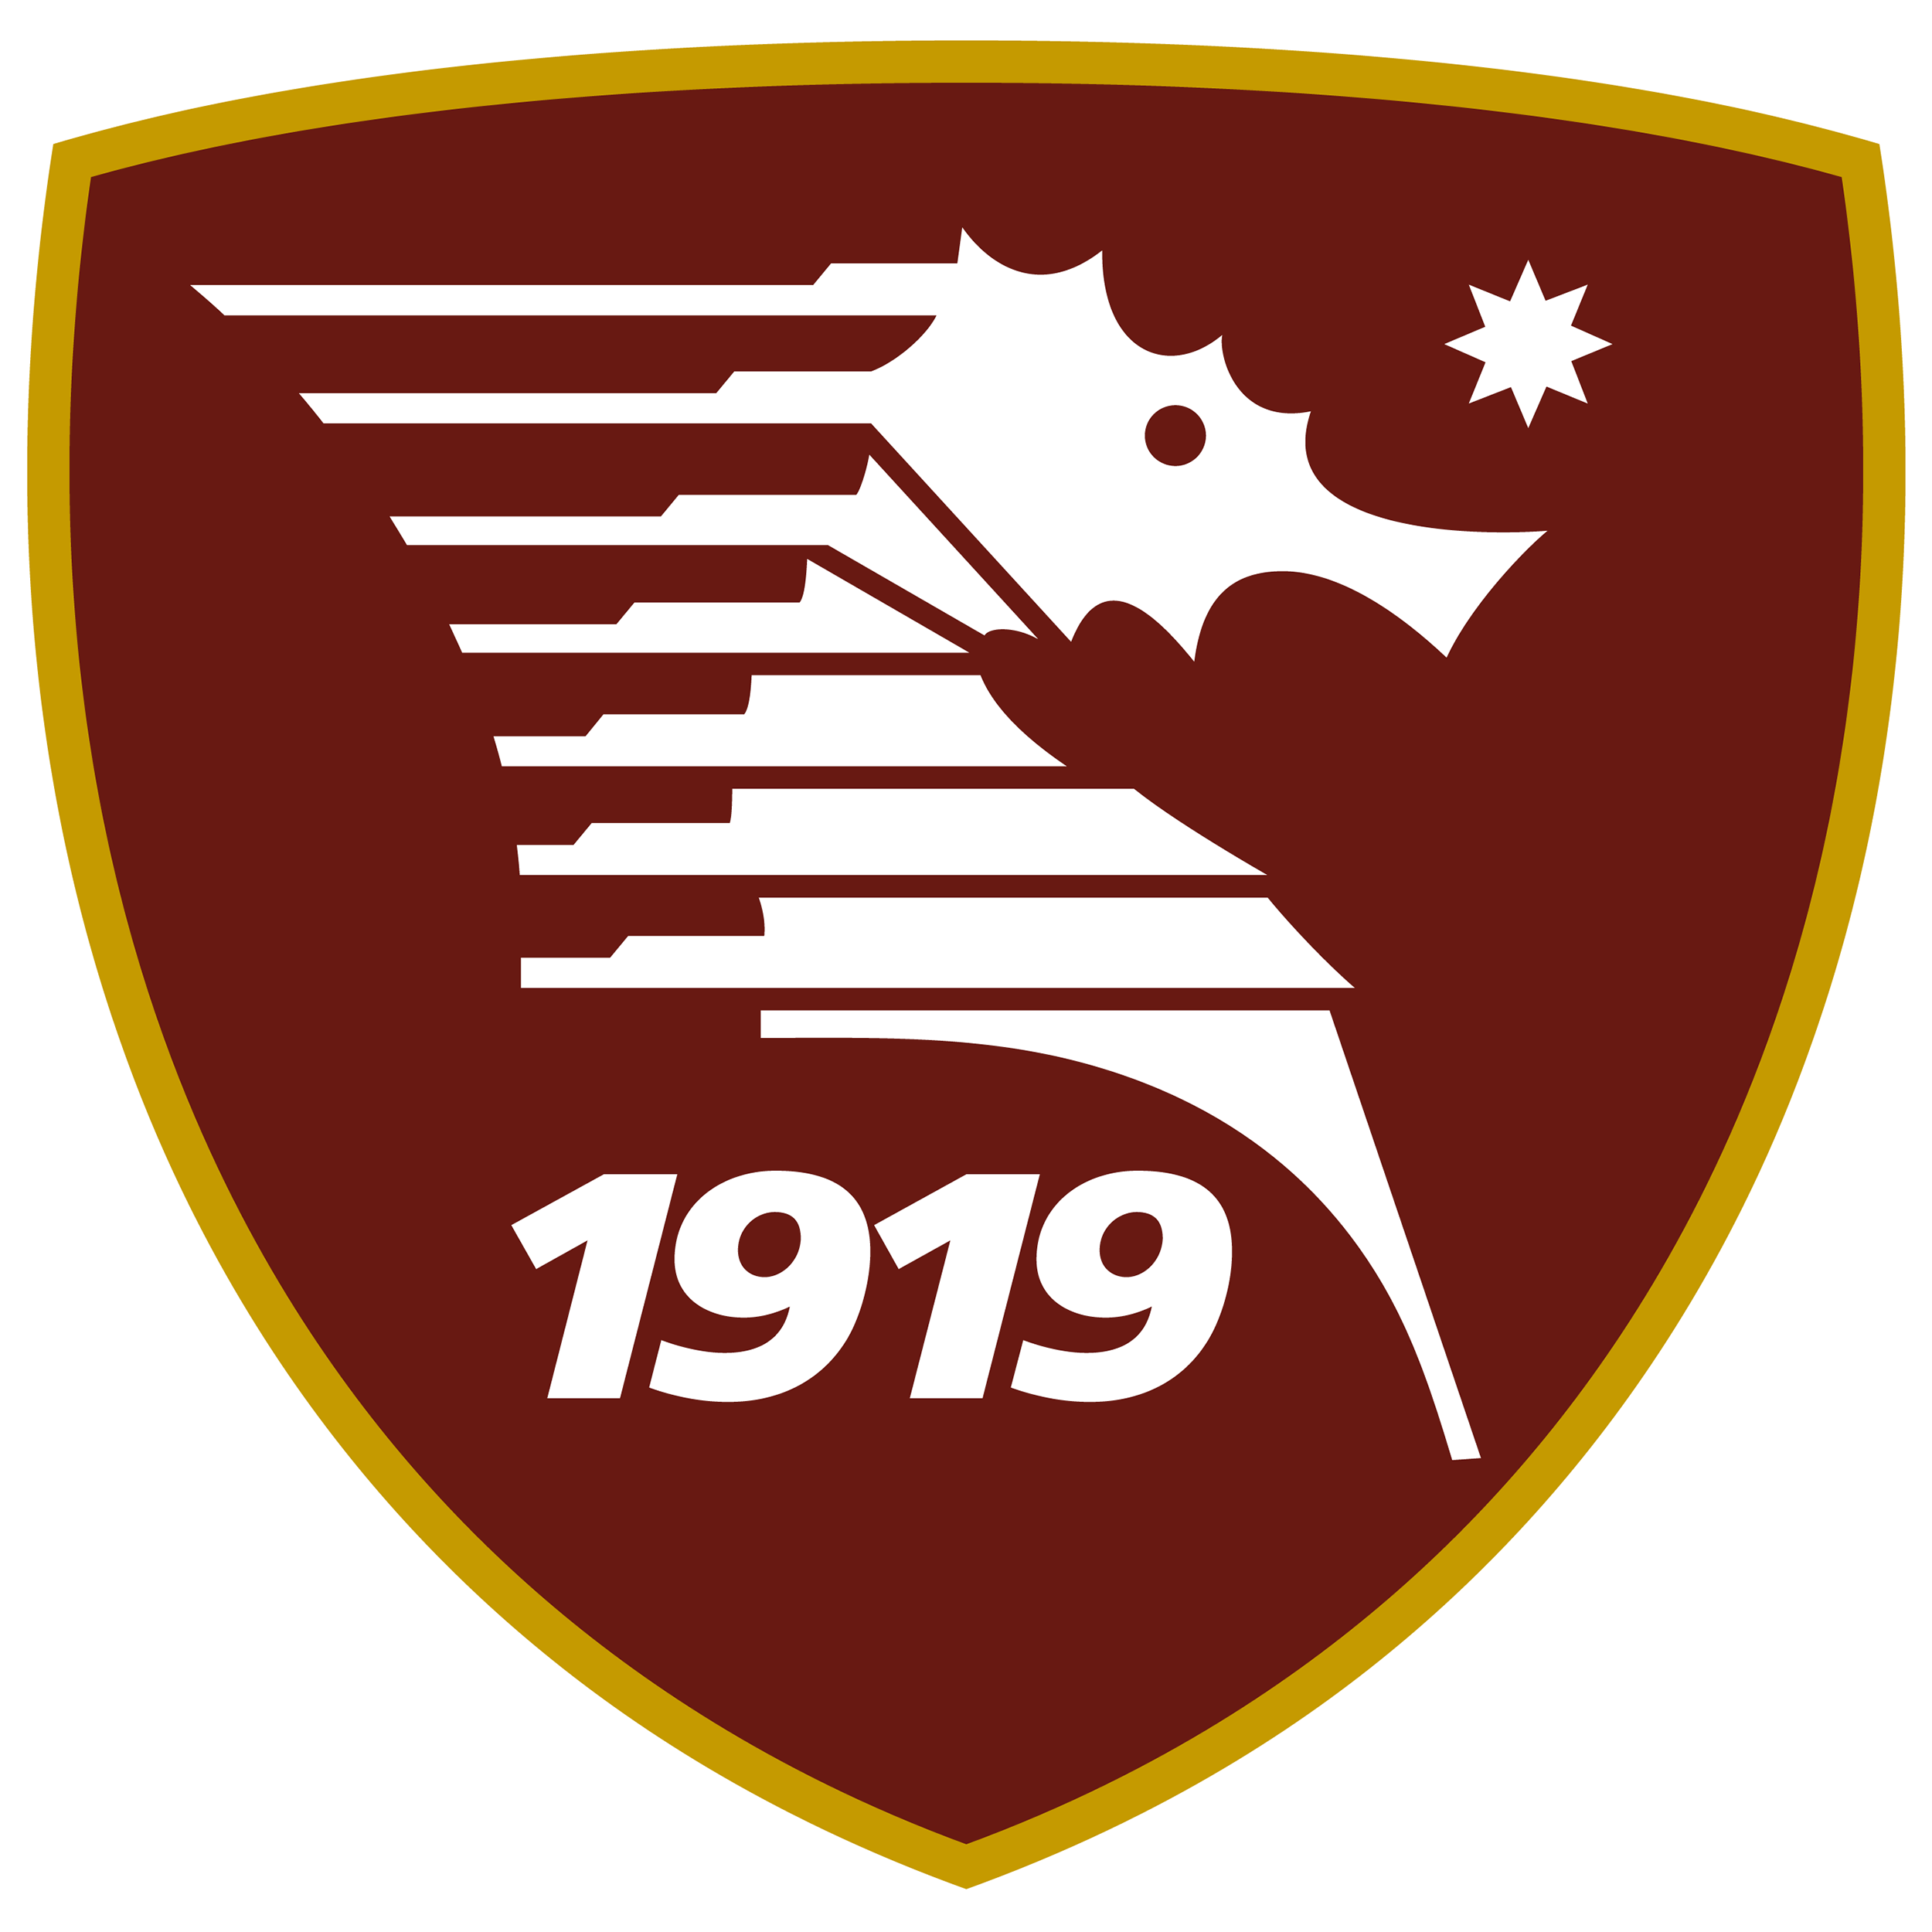 Salernitana vs Monza Prediction: Will Salerno not be able to count on success either?